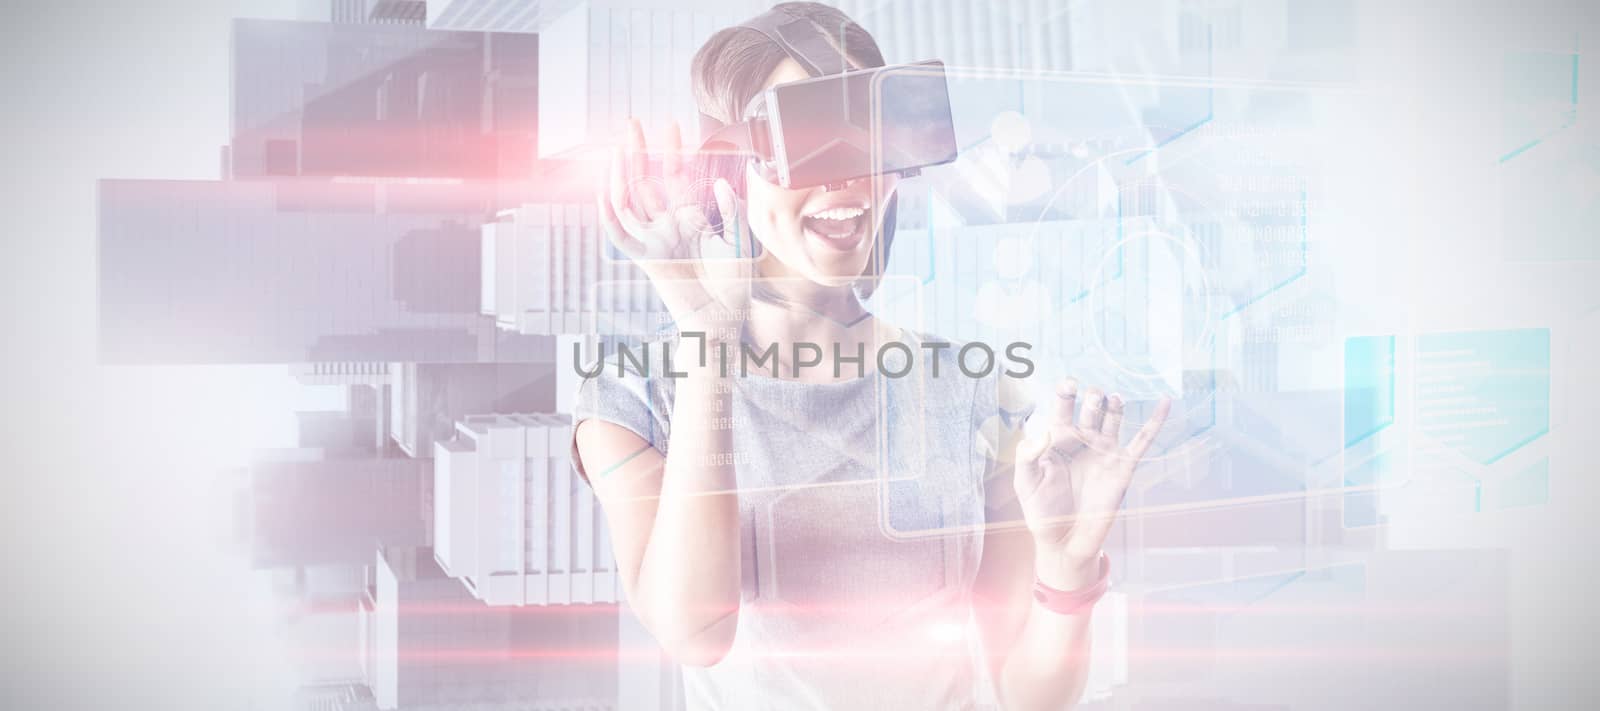 Businesswoman holding virtual glasses on a white background against view from balcony over city